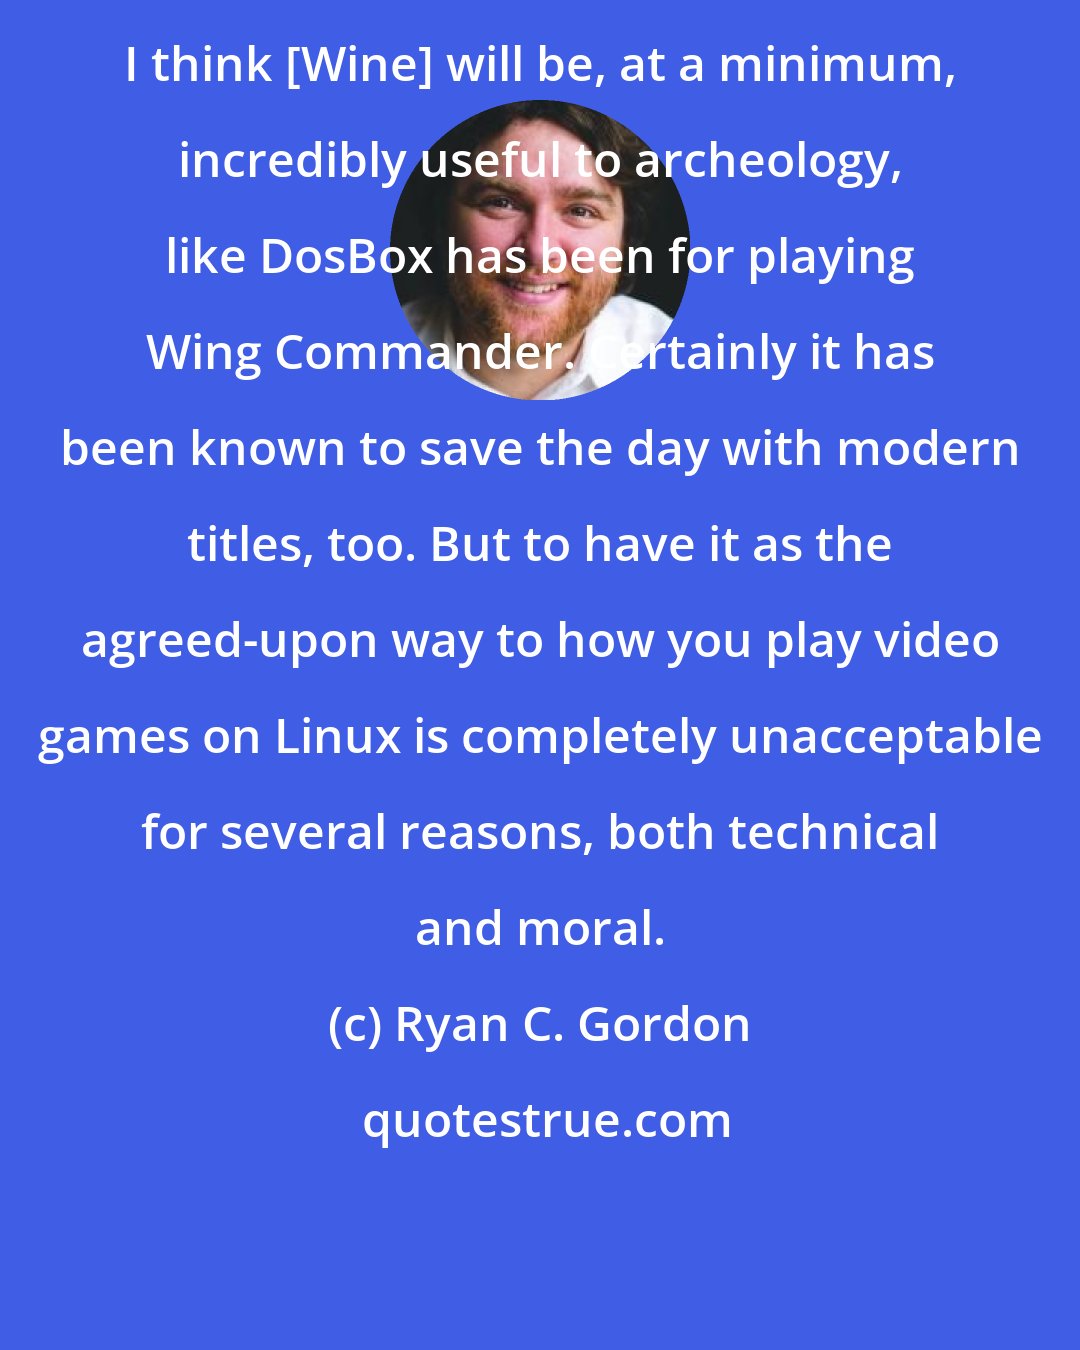 Ryan C. Gordon: I think [Wine] will be, at a minimum, incredibly useful to archeology, like DosBox has been for playing Wing Commander. Certainly it has been known to save the day with modern titles, too. But to have it as the agreed-upon way to how you play video games on Linux is completely unacceptable for several reasons, both technical and moral.